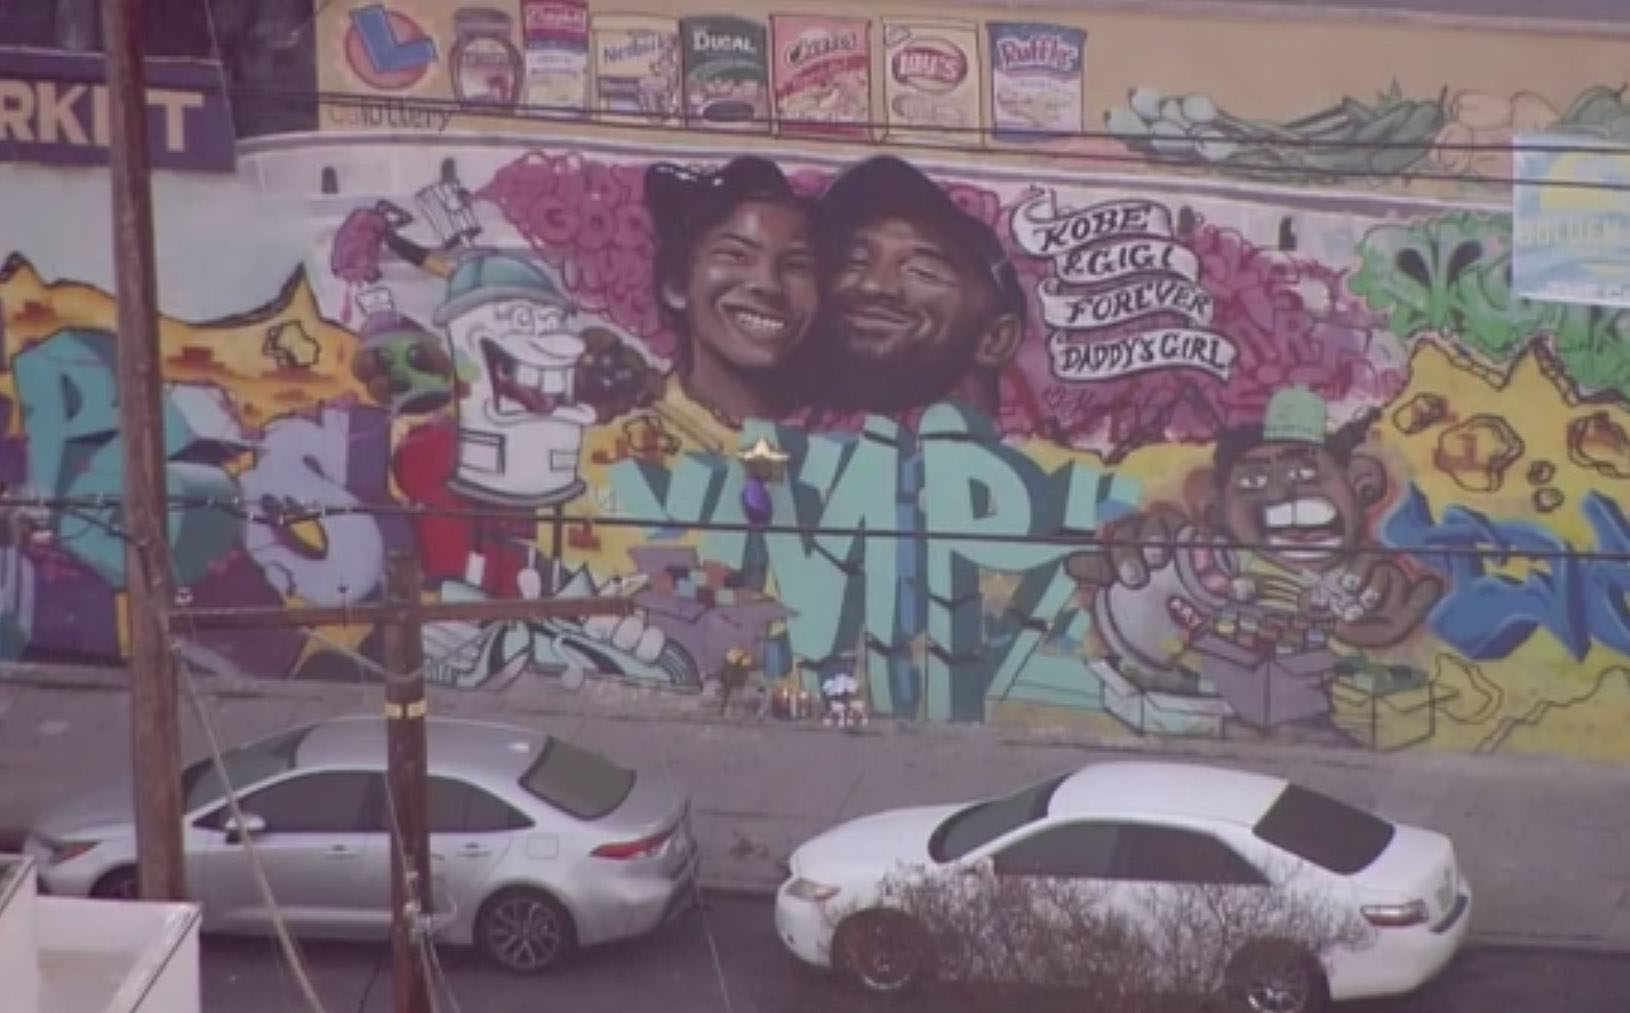 PHOTO: A mural of Kobe and Gianna Bryant emerged in Mid-Ciy, Los Angeles less than 24-hours after the two died in a helicopter crash.